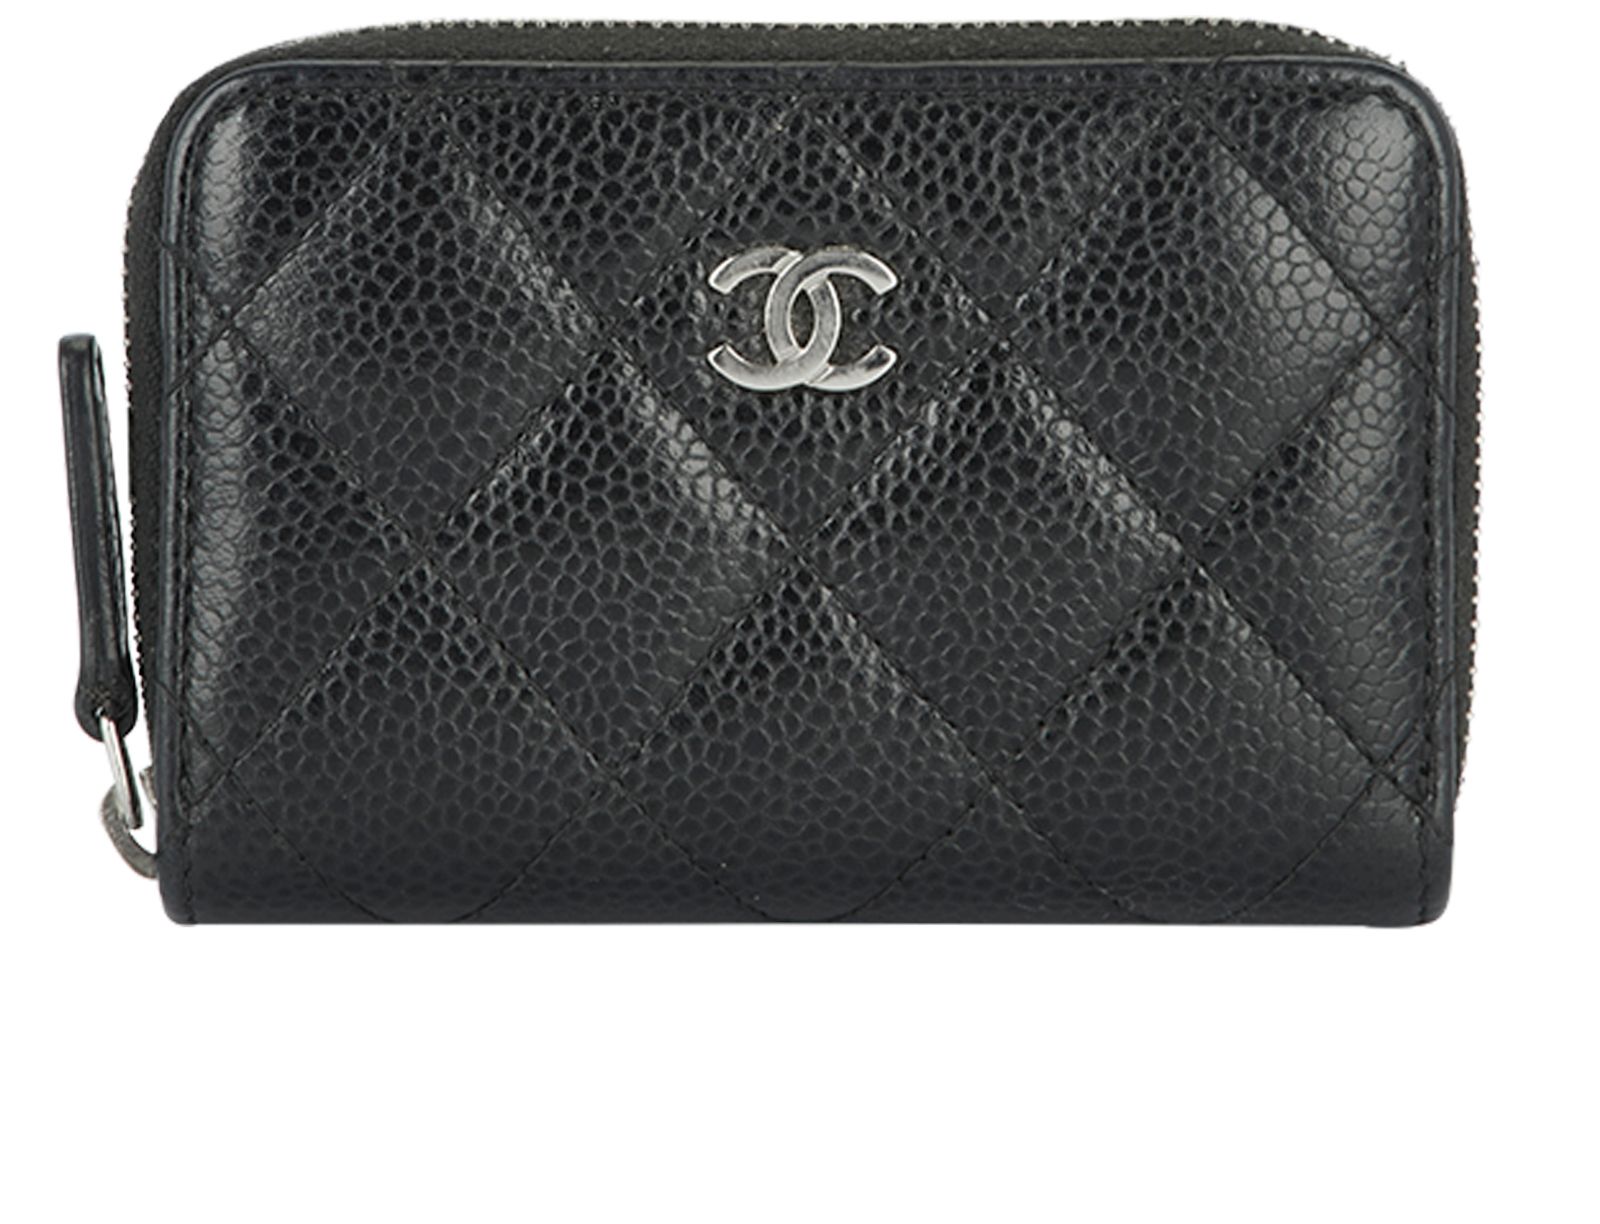 Chanel Zip Coin Purse, Small Leather Goods - Designer Exchange